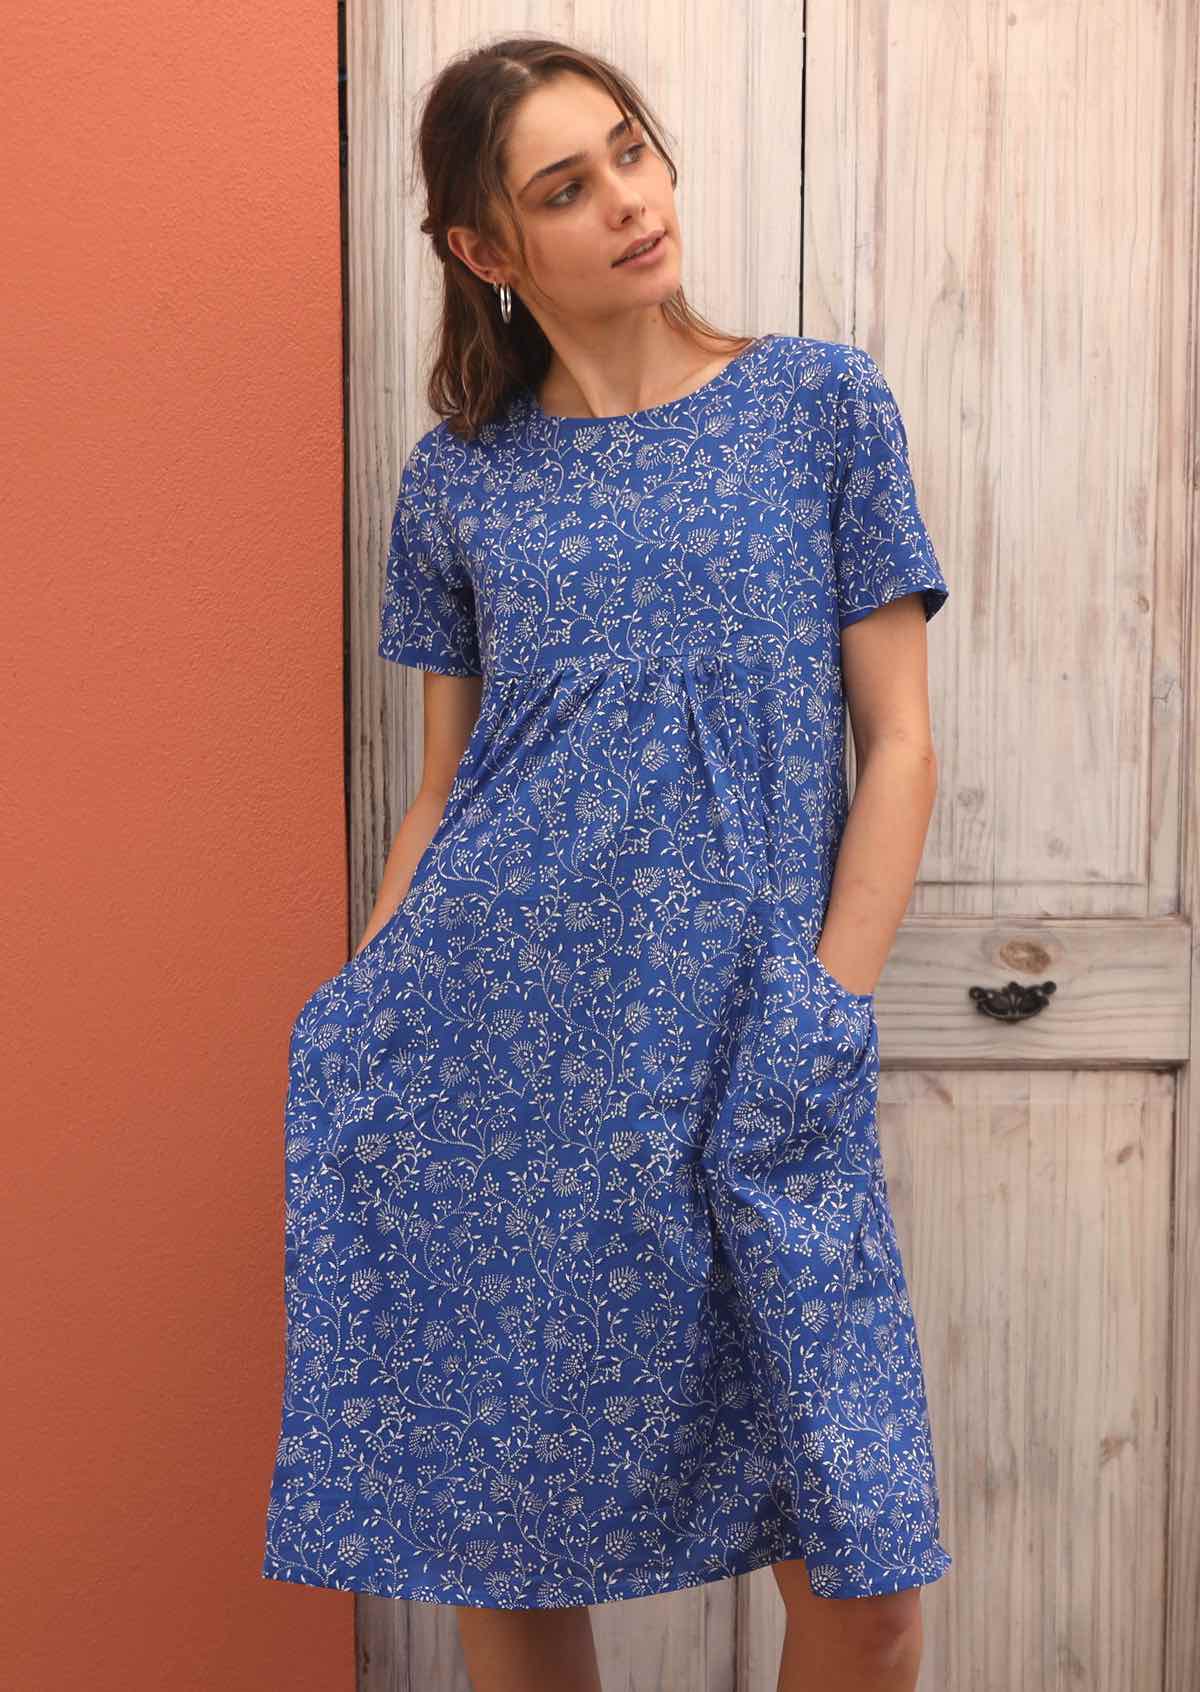 Model puts hands in the pockets of her loose-fitting dress. 